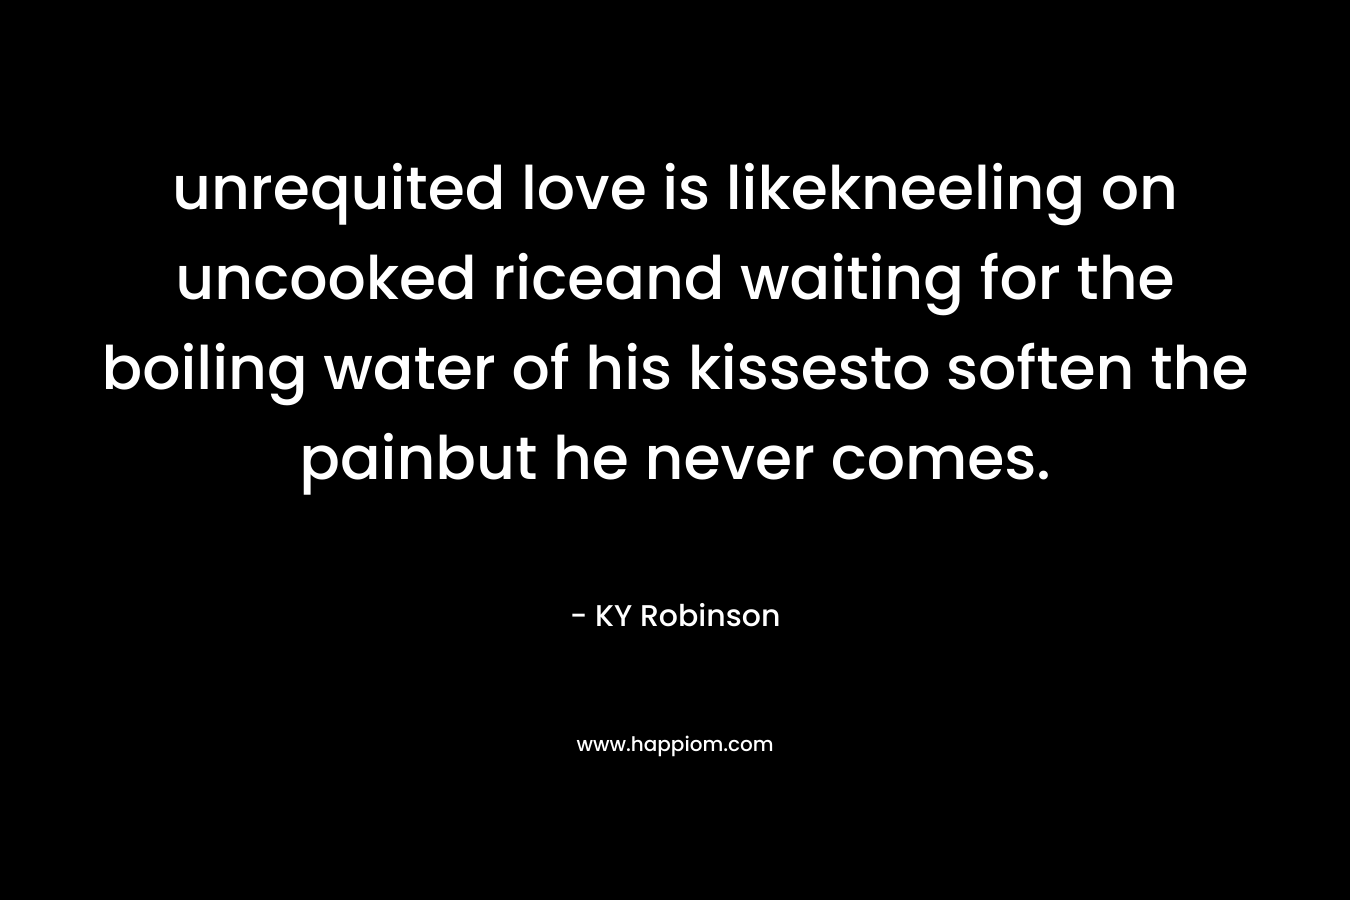 unrequited love is likekneeling on uncooked riceand waiting for the boiling water of his kissesto soften the painbut he never comes.